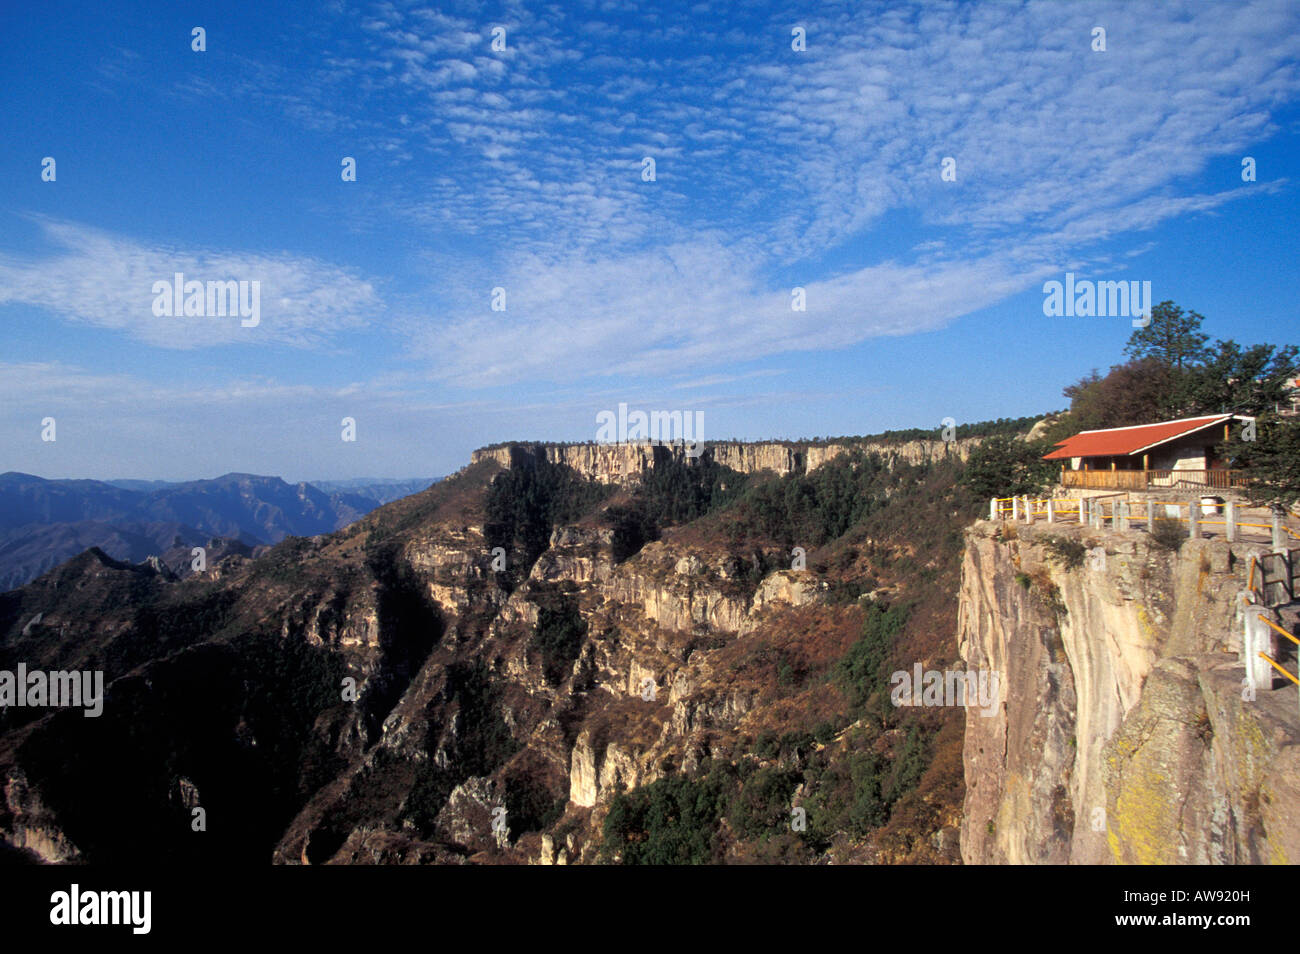 The lookout at Divisadero in the Copper Canyon or Barranca del Cobre, Chihuahua, Mexico Stock Photo